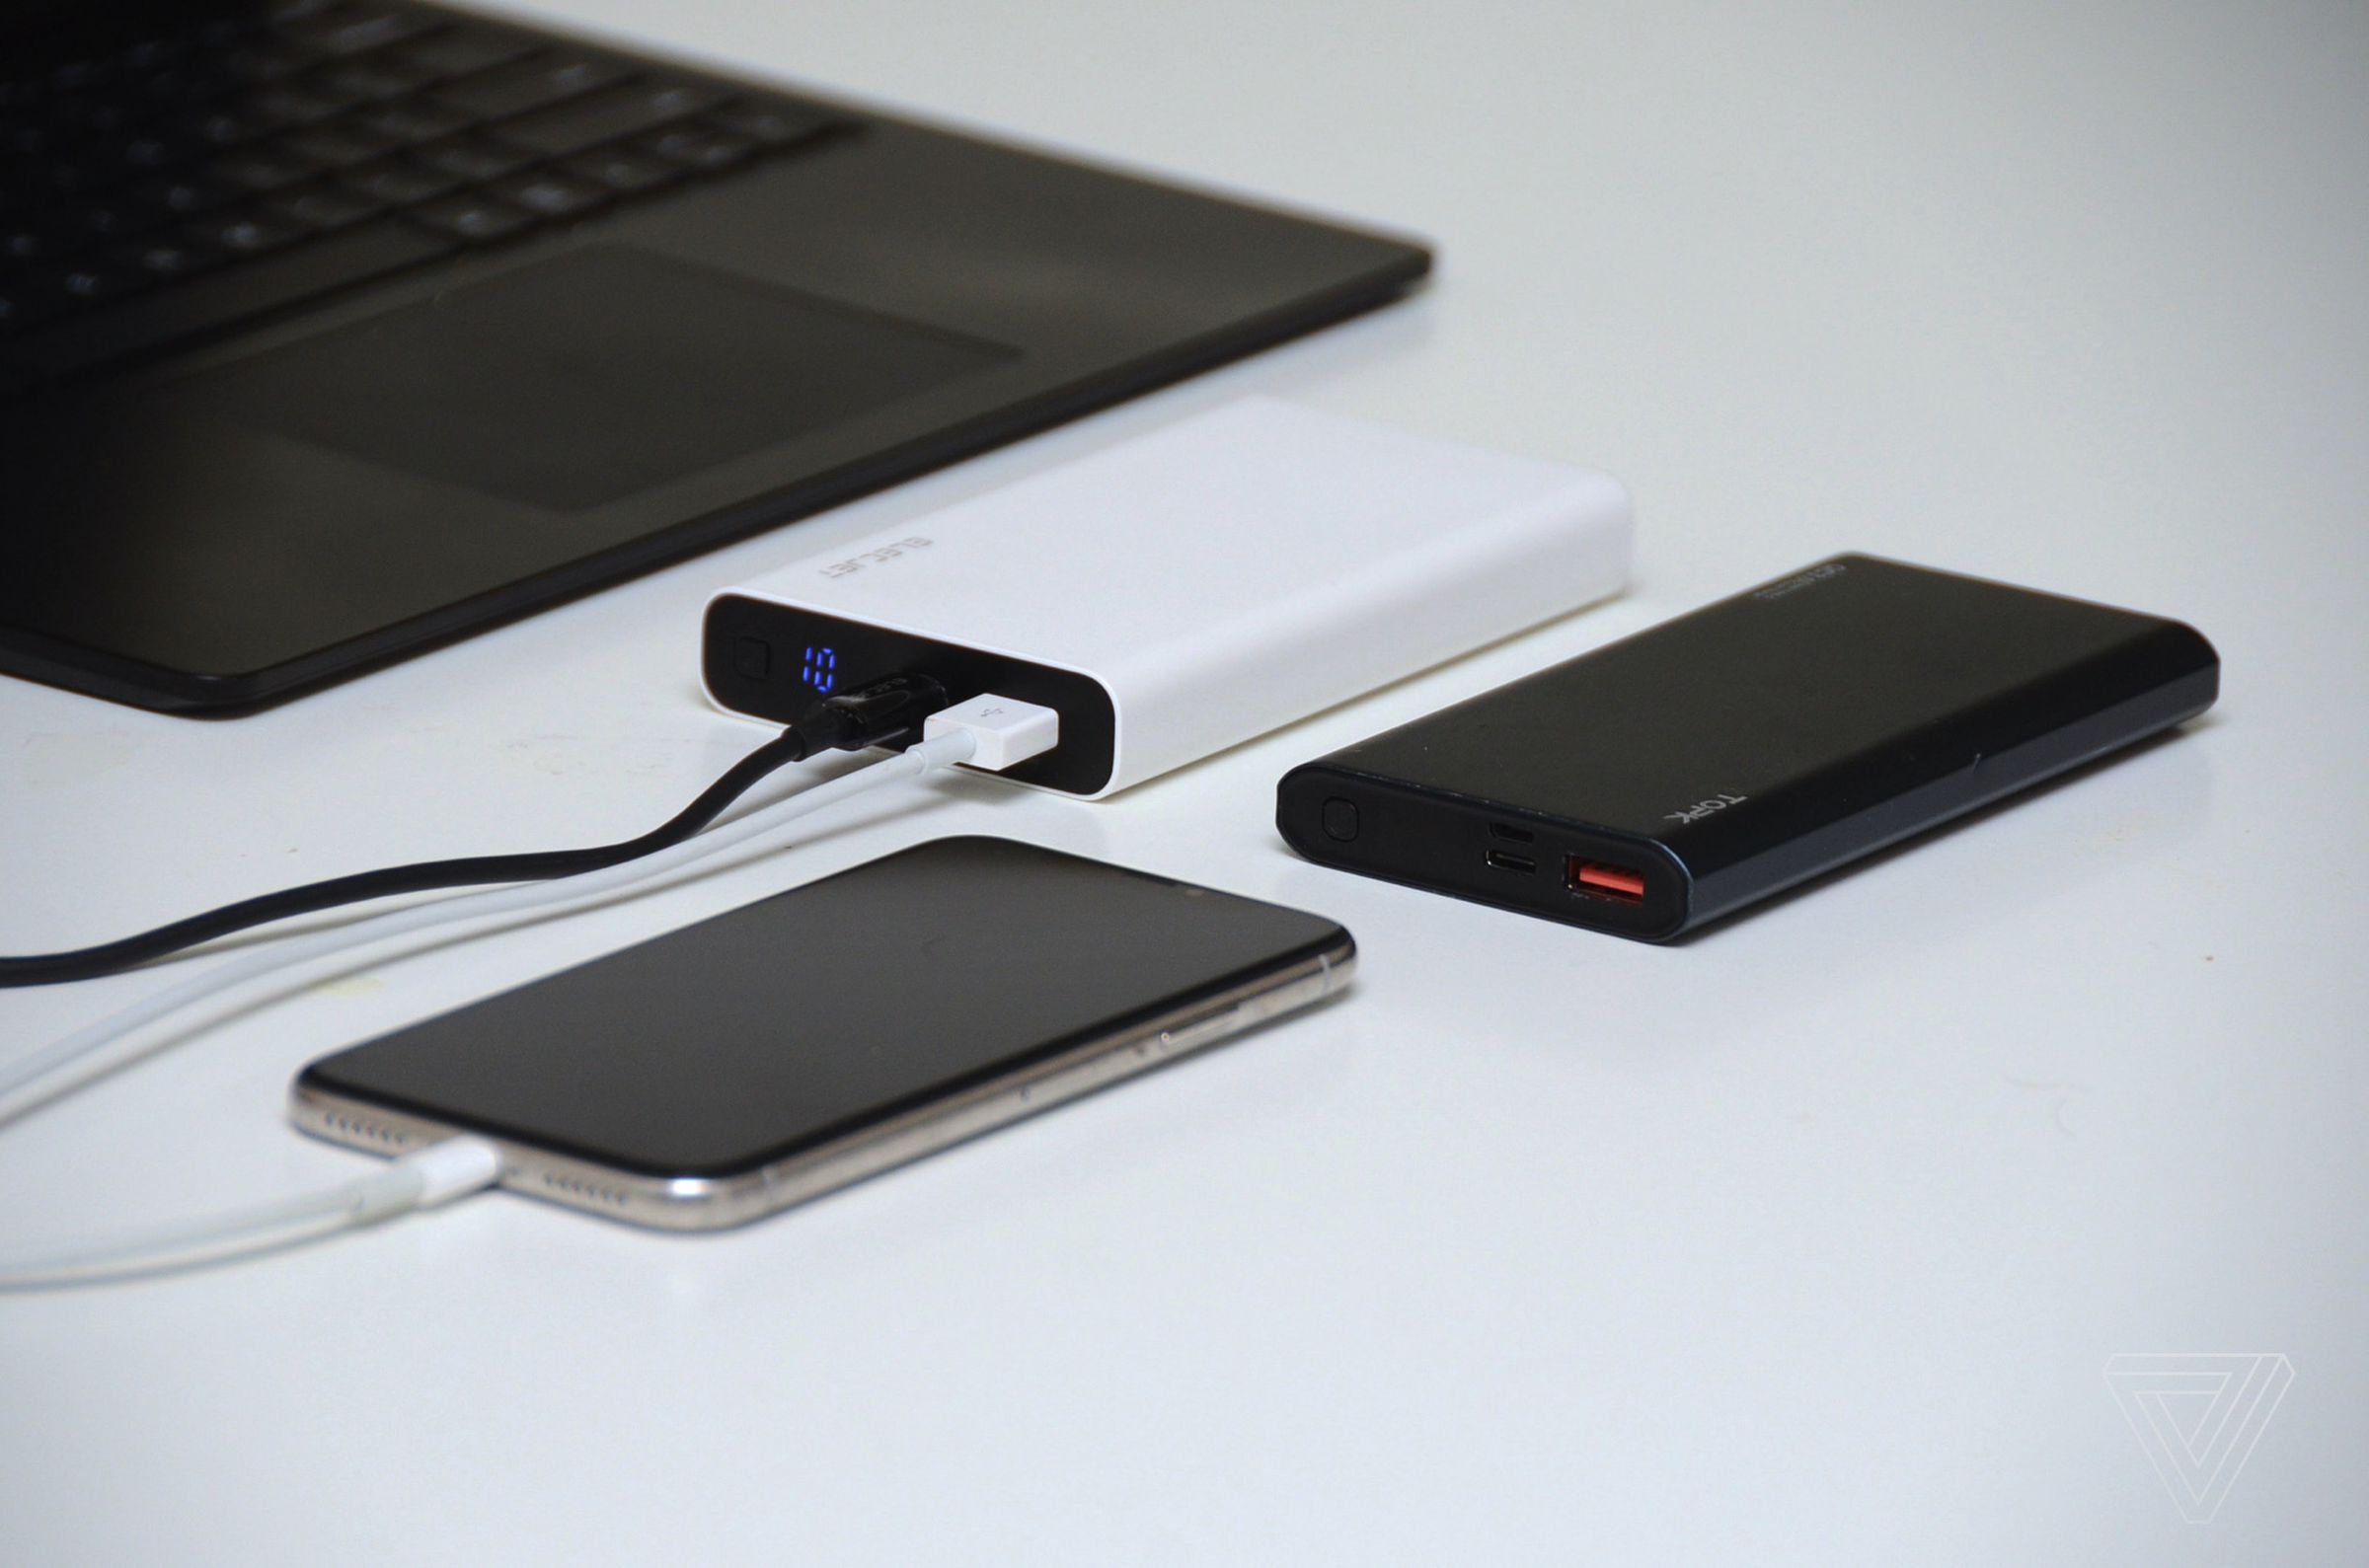 The Elecjet Apollo Ultra is slightly thicker than conventional power banks of the same capacity.